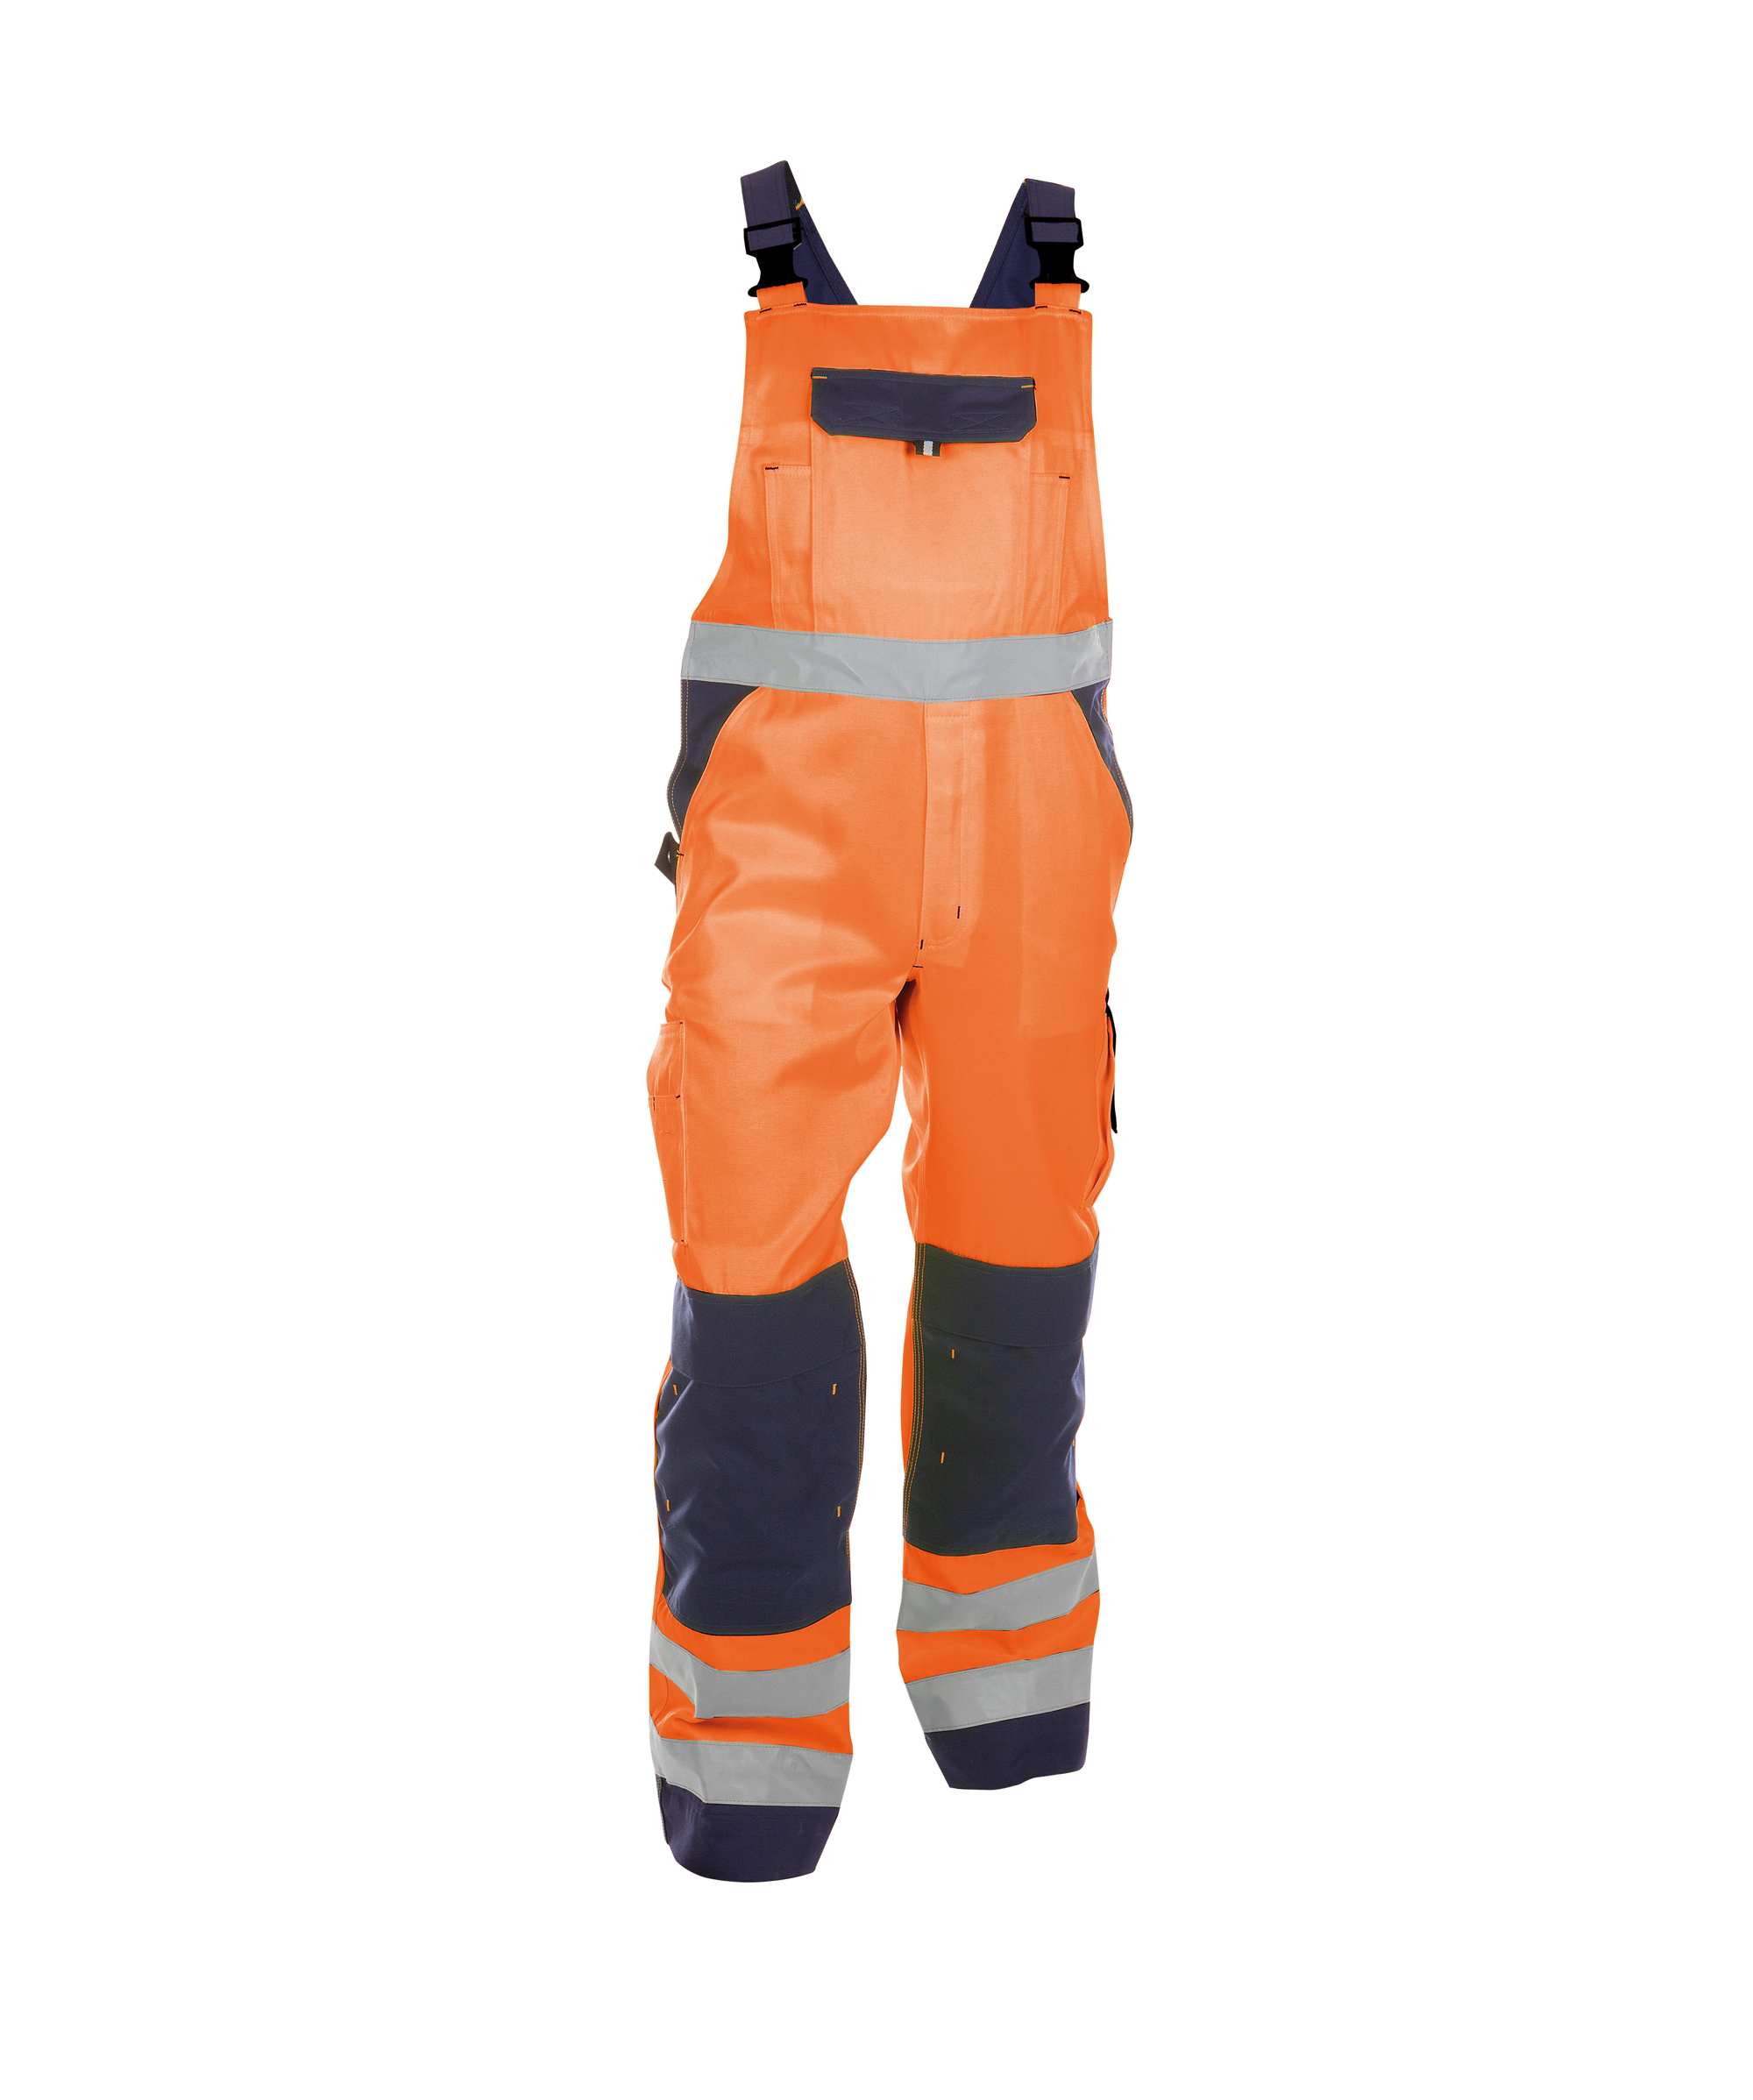 toulouse_high-visibility-brace-overall-with-knee-pockets_fluo-orange-navy_front.jpg